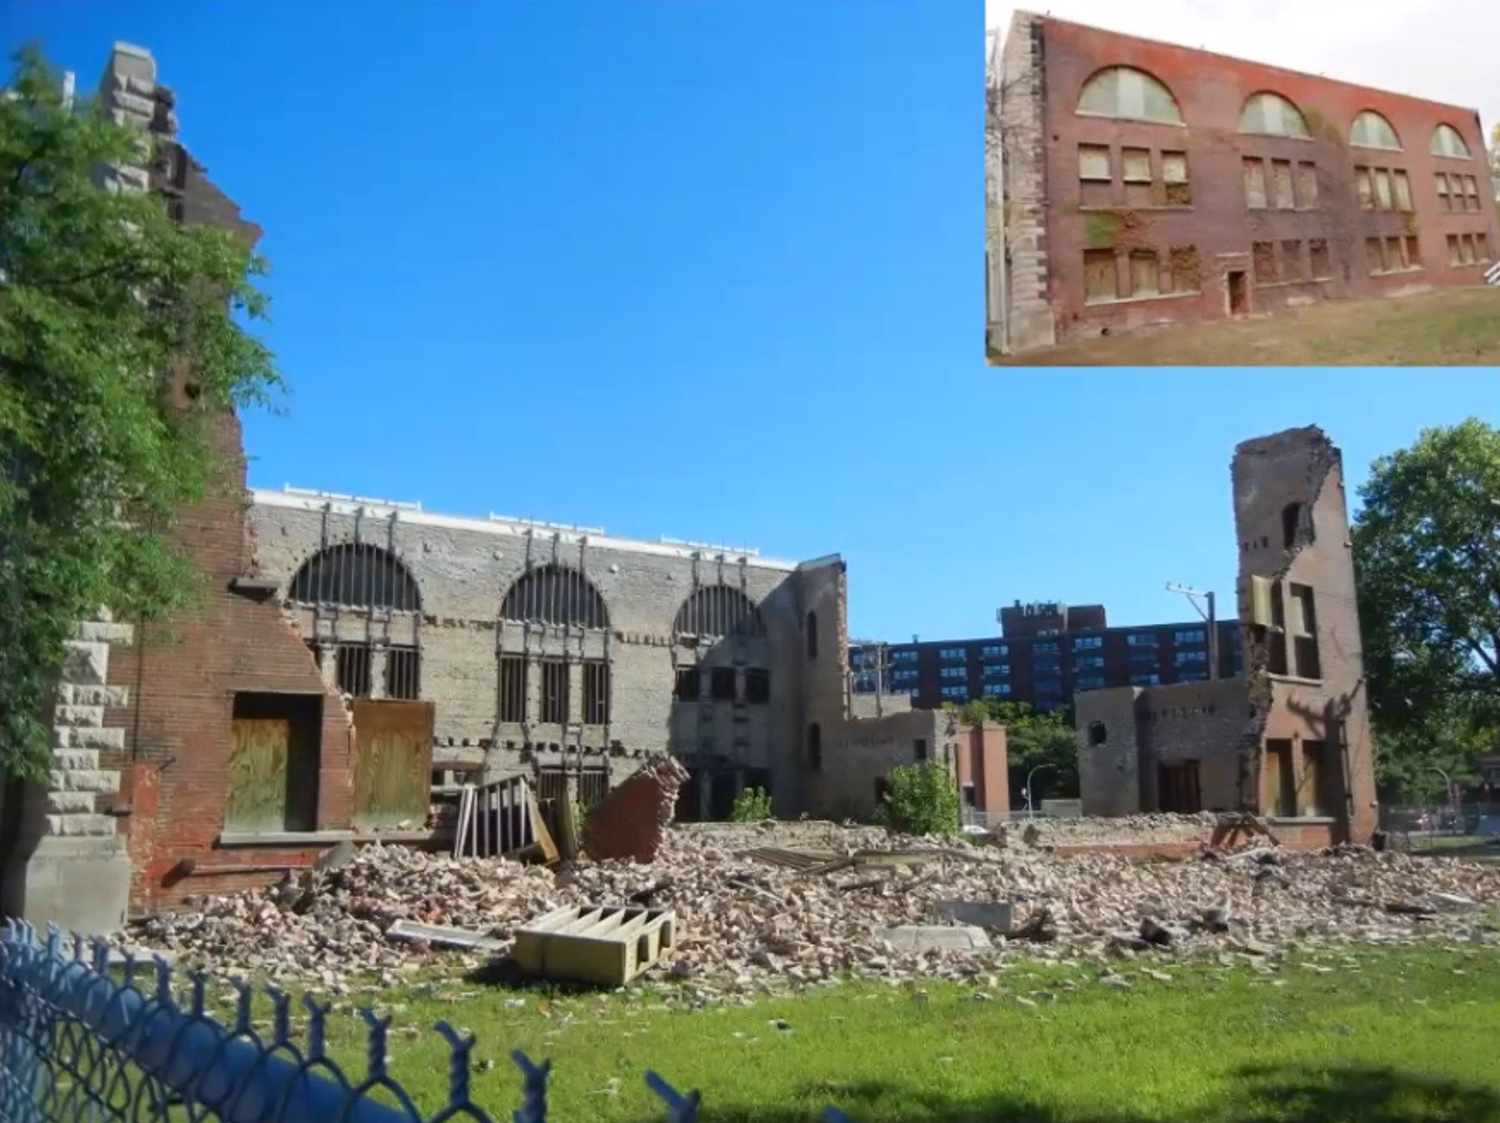 South Wall After August 2020 Collapse. Image by Landmarks Commission